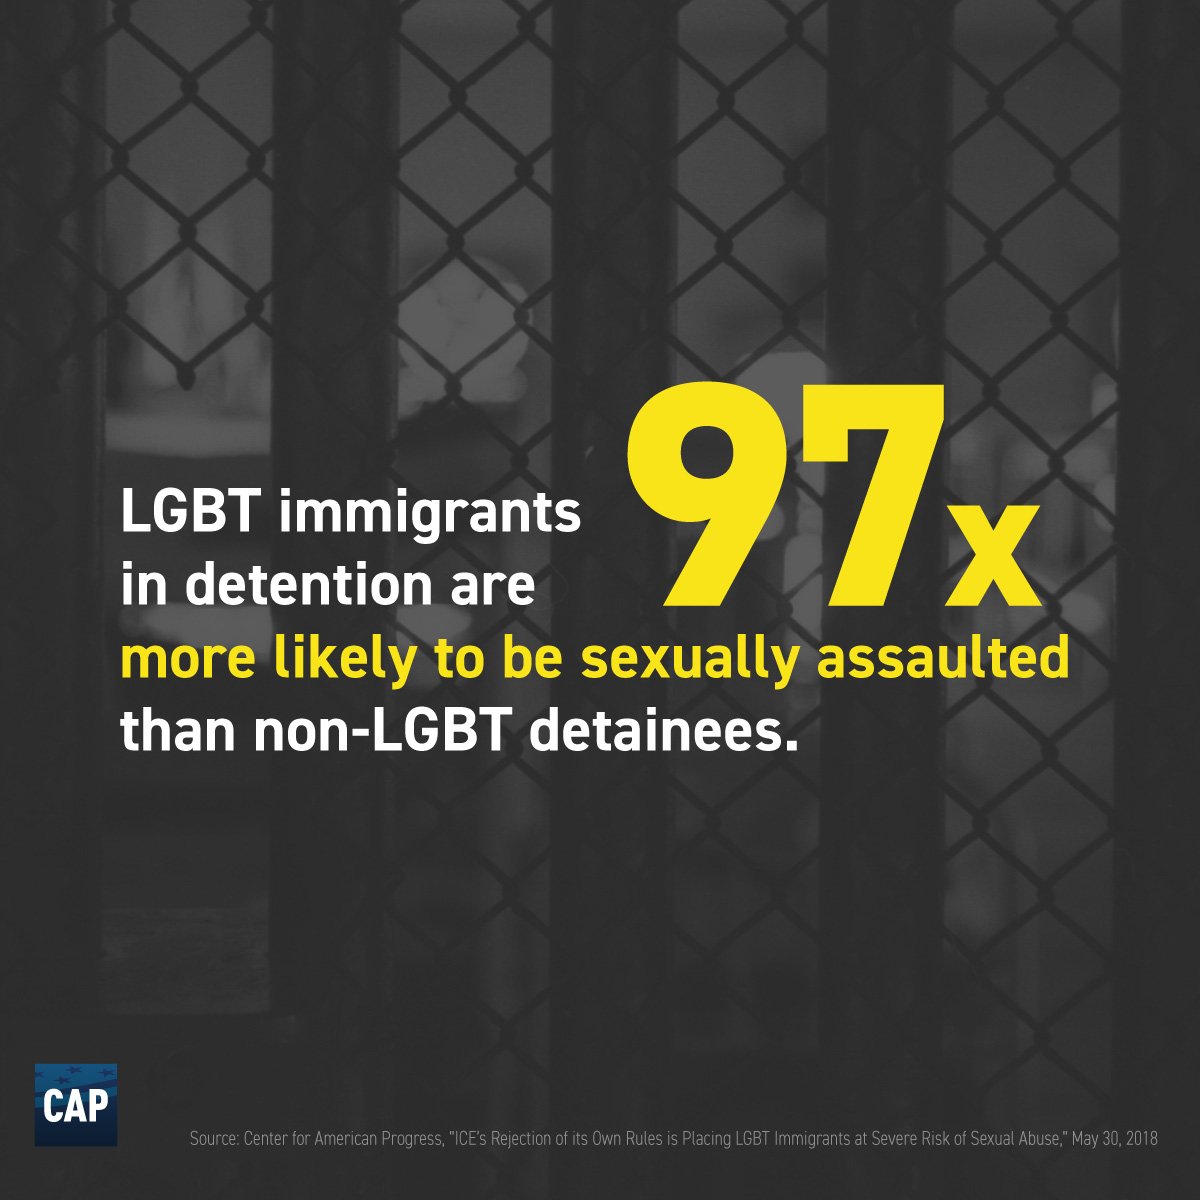 LGBT people were .13% of ICE’s detained population in 2017, yet they accounted for 12% of victims in reports of sexual assault #Not1More #AbolishDetention #DefundHate